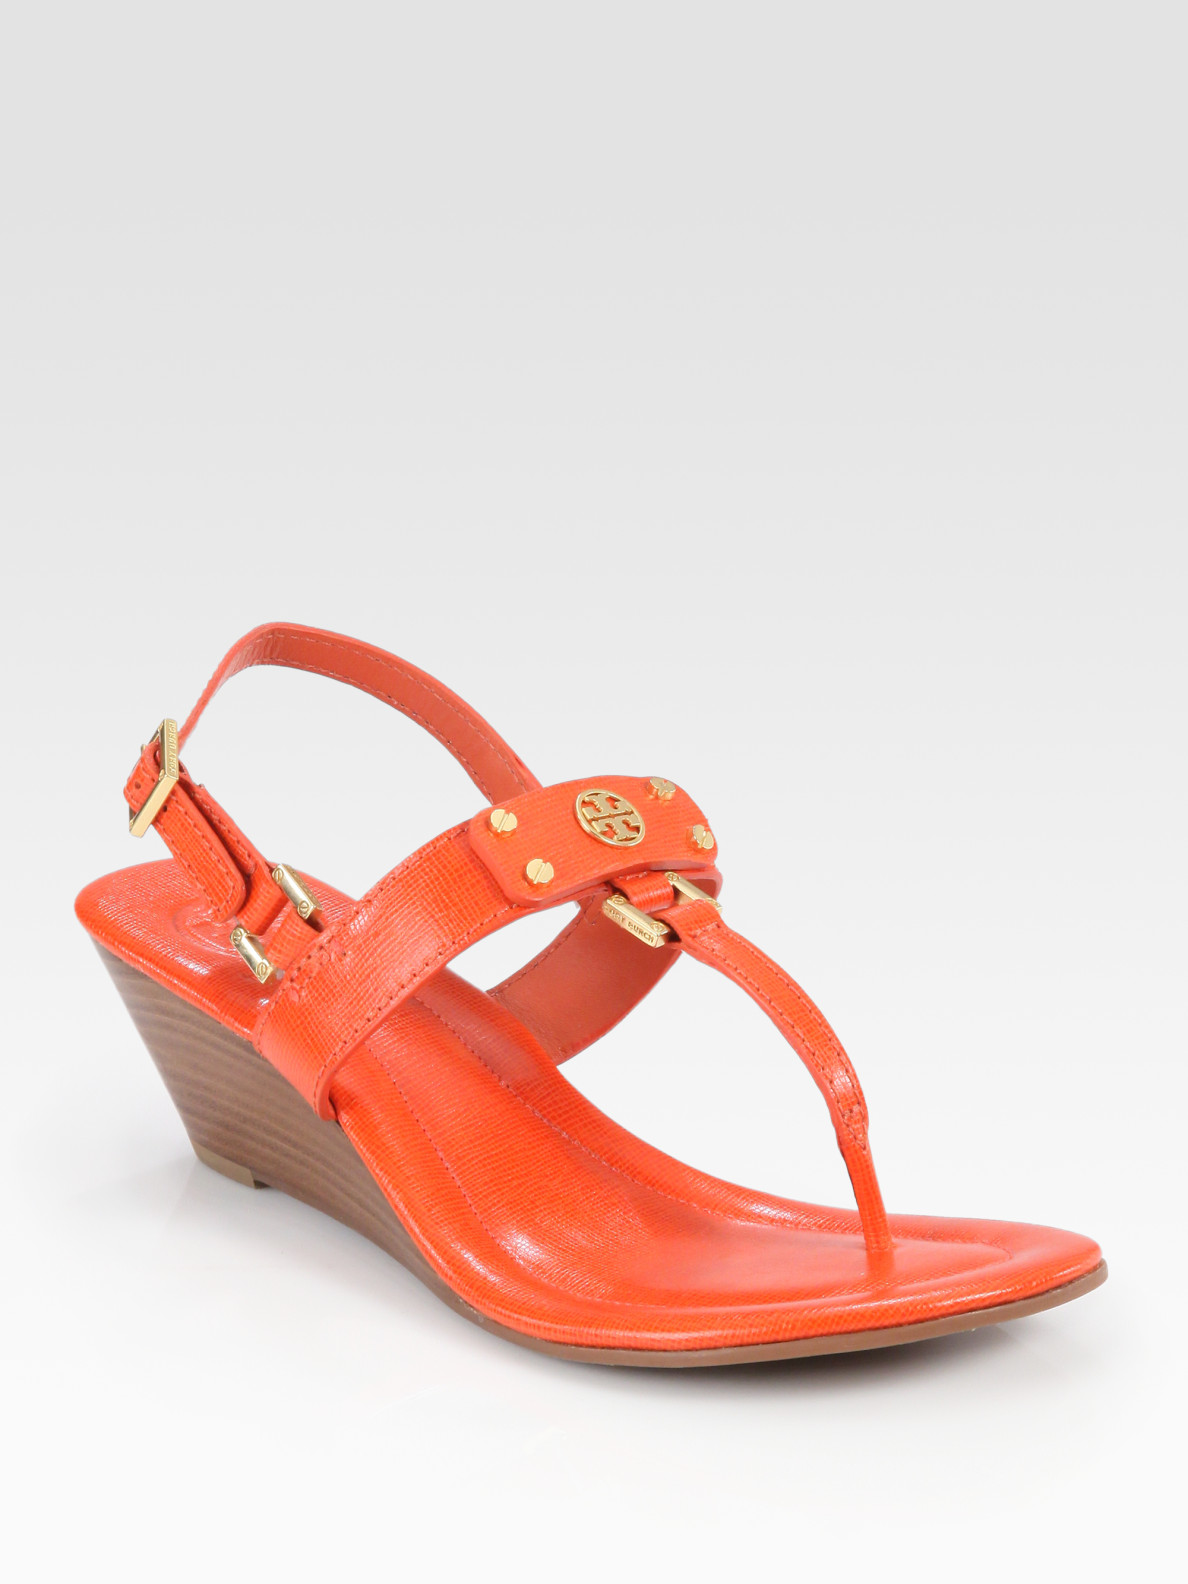 Tory burch Robinson Leather Slingback Thong Wedge Sandals in Orange | Lyst